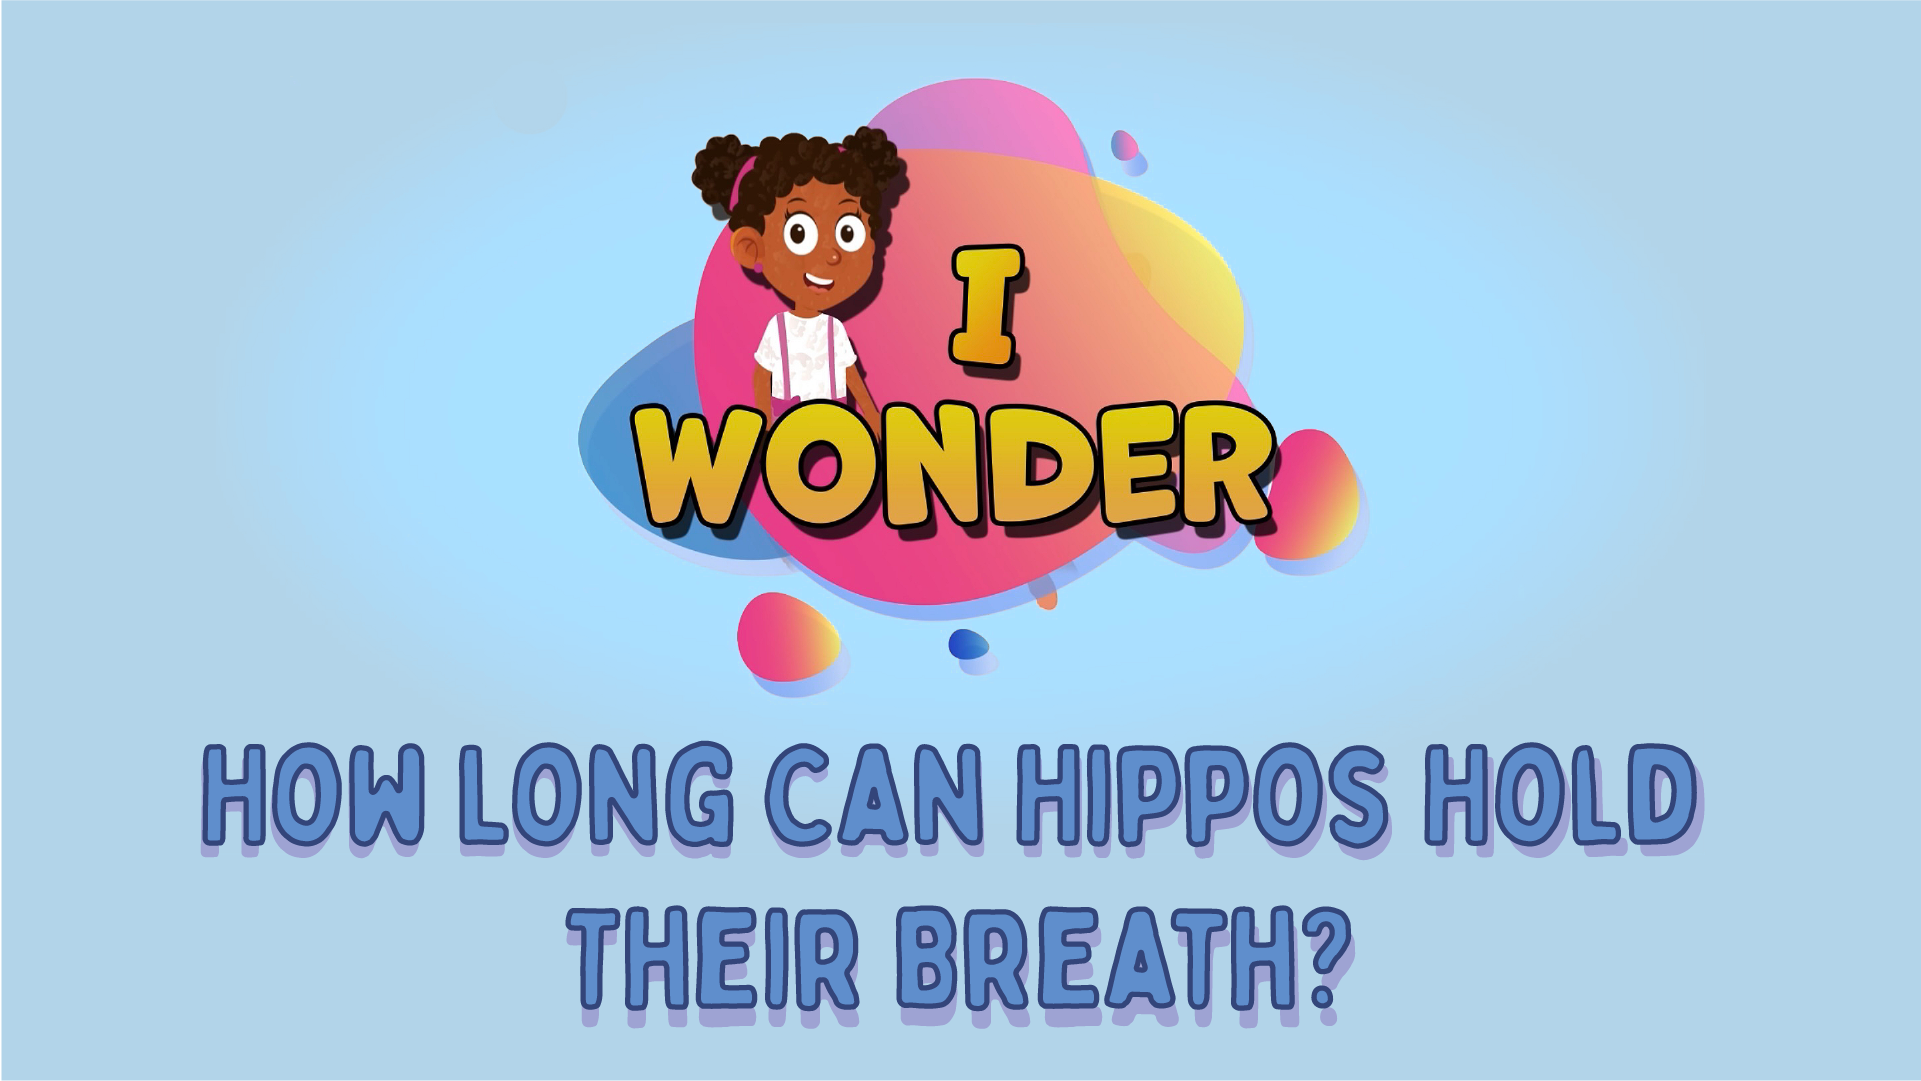 How Long Can Hippos Hold Their Breath?